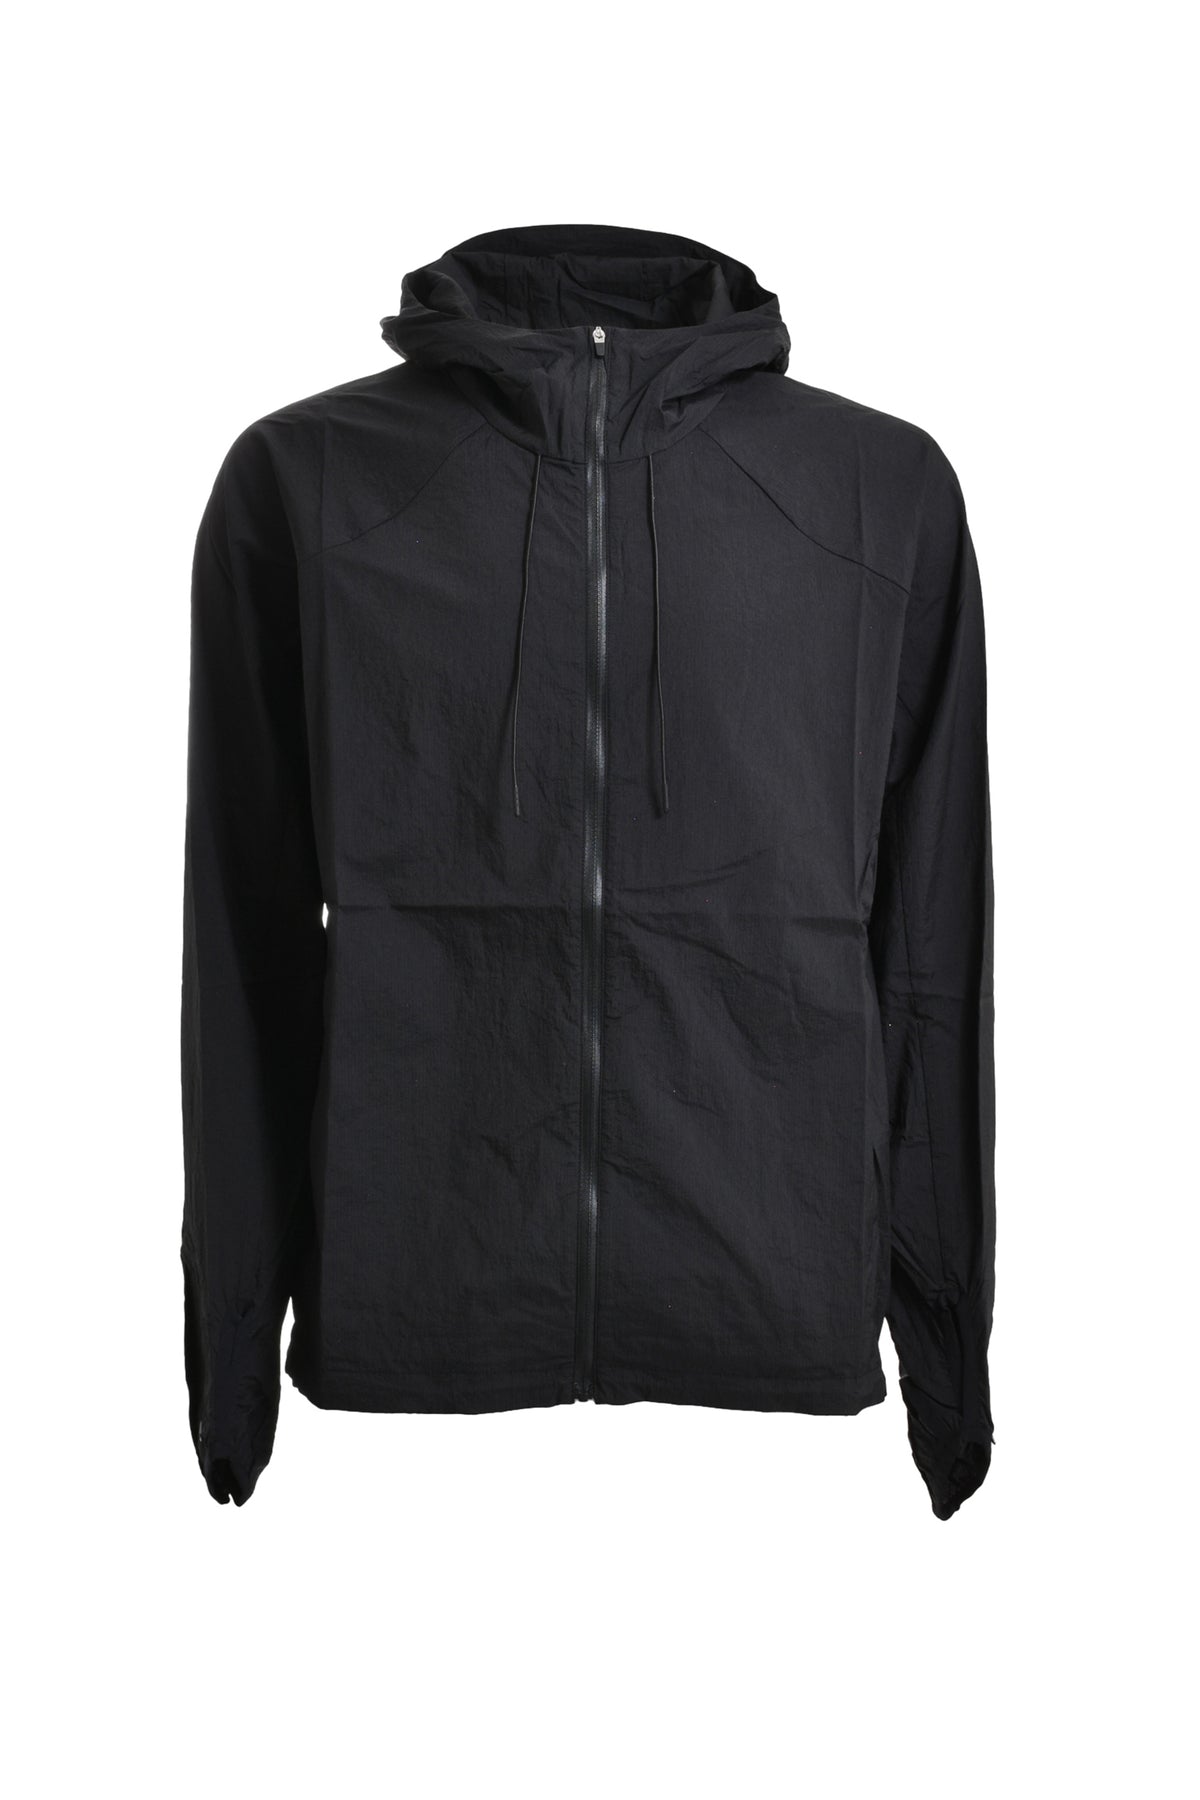 POST ARCHIVE FACTION (PAF) 5.1 TECHNICAL JACKET RIGHT / BLK